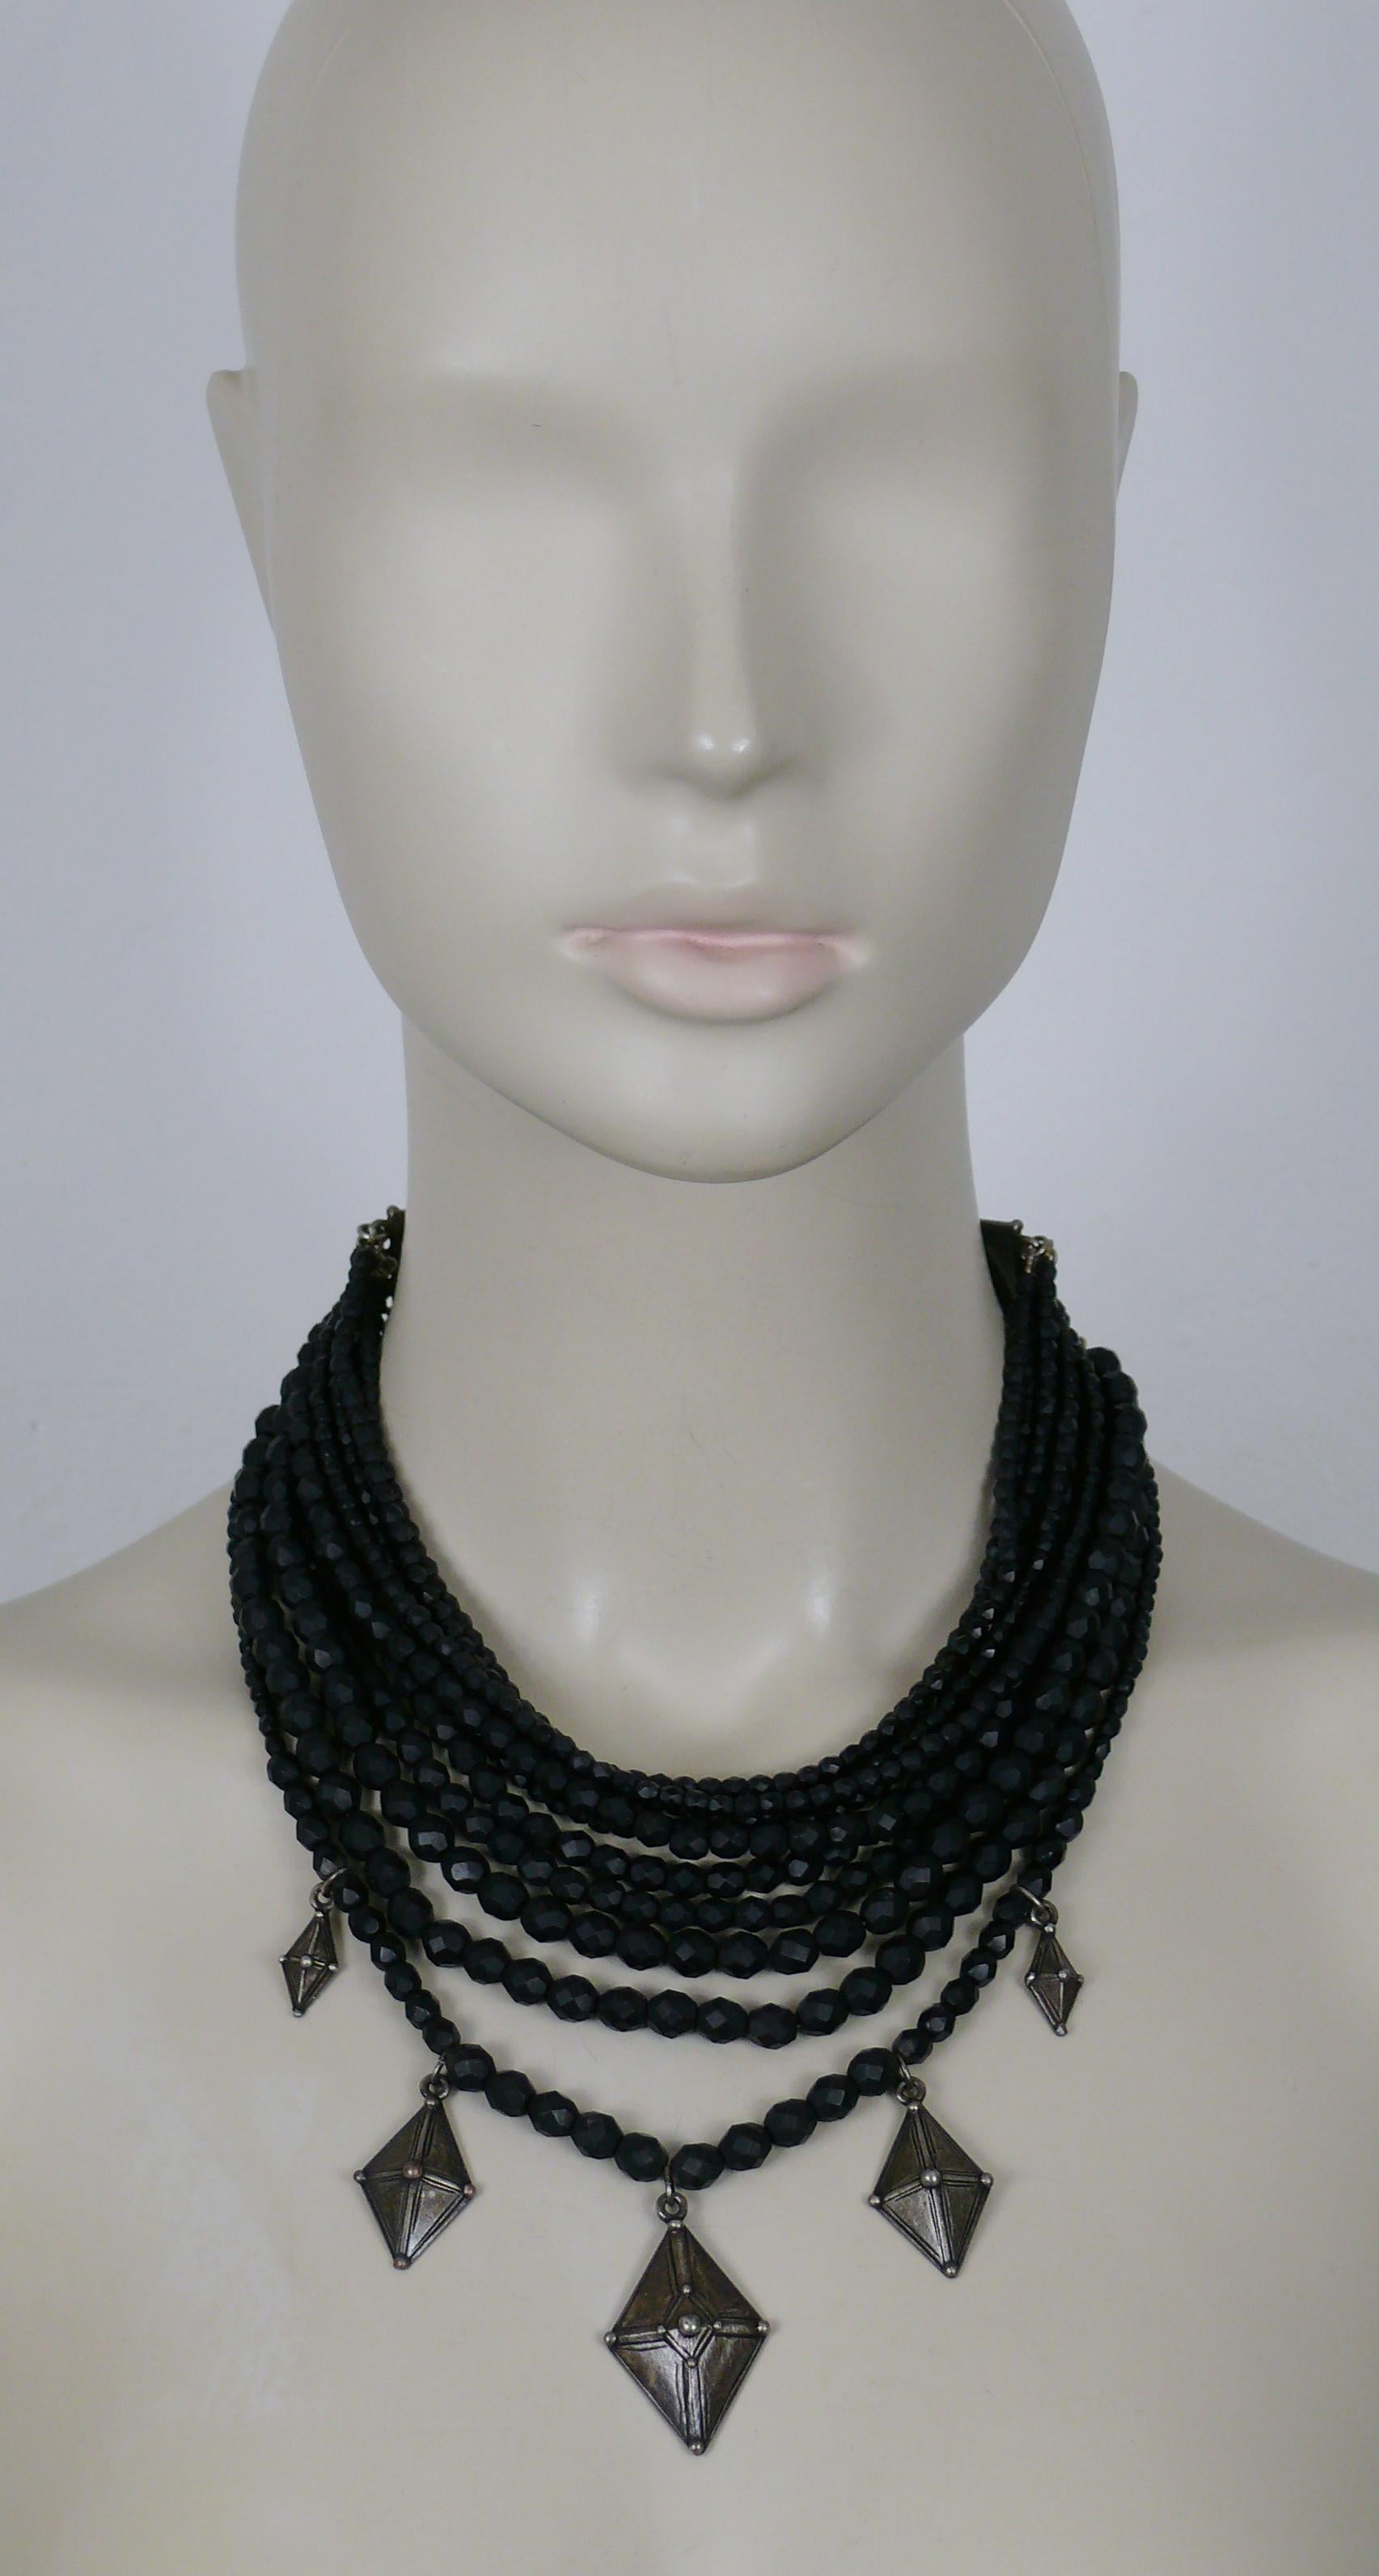 JEAN PAUL GAULTIER vintage ethnic multistrand necklace featuring black matte glass beads, antiqued silver tone hardware and diamond-shaped charms.

Lobster clasp closure.

Marked GAULTIER.

Indicative measurements : adjustable length from approx. 42